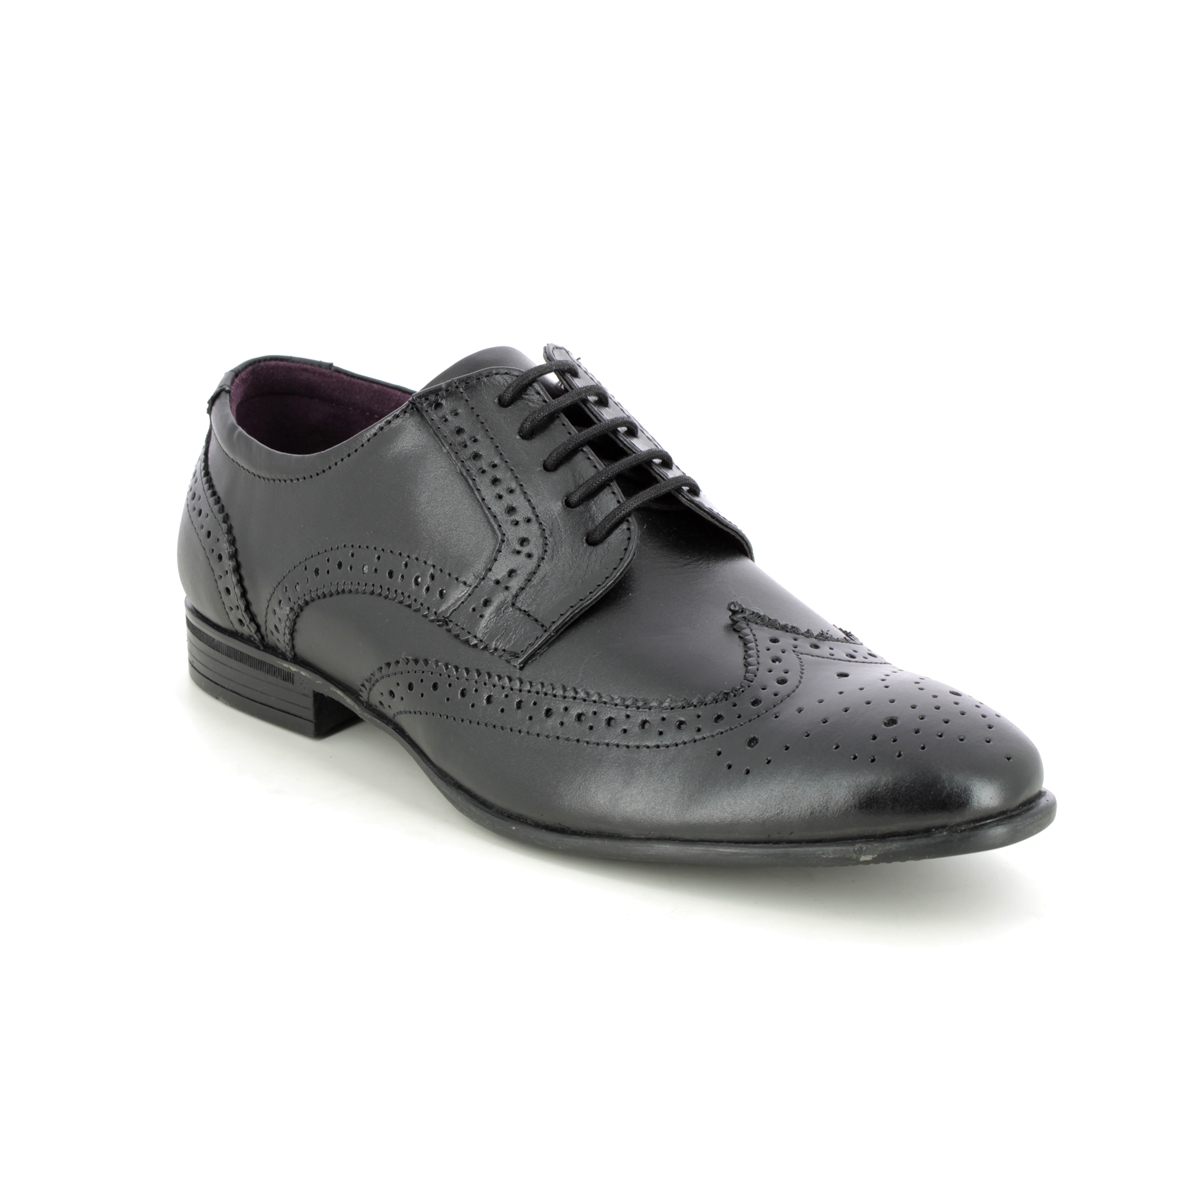 Lotus Easton Black leather Mens Brogues in a Plain Leather in Size 7